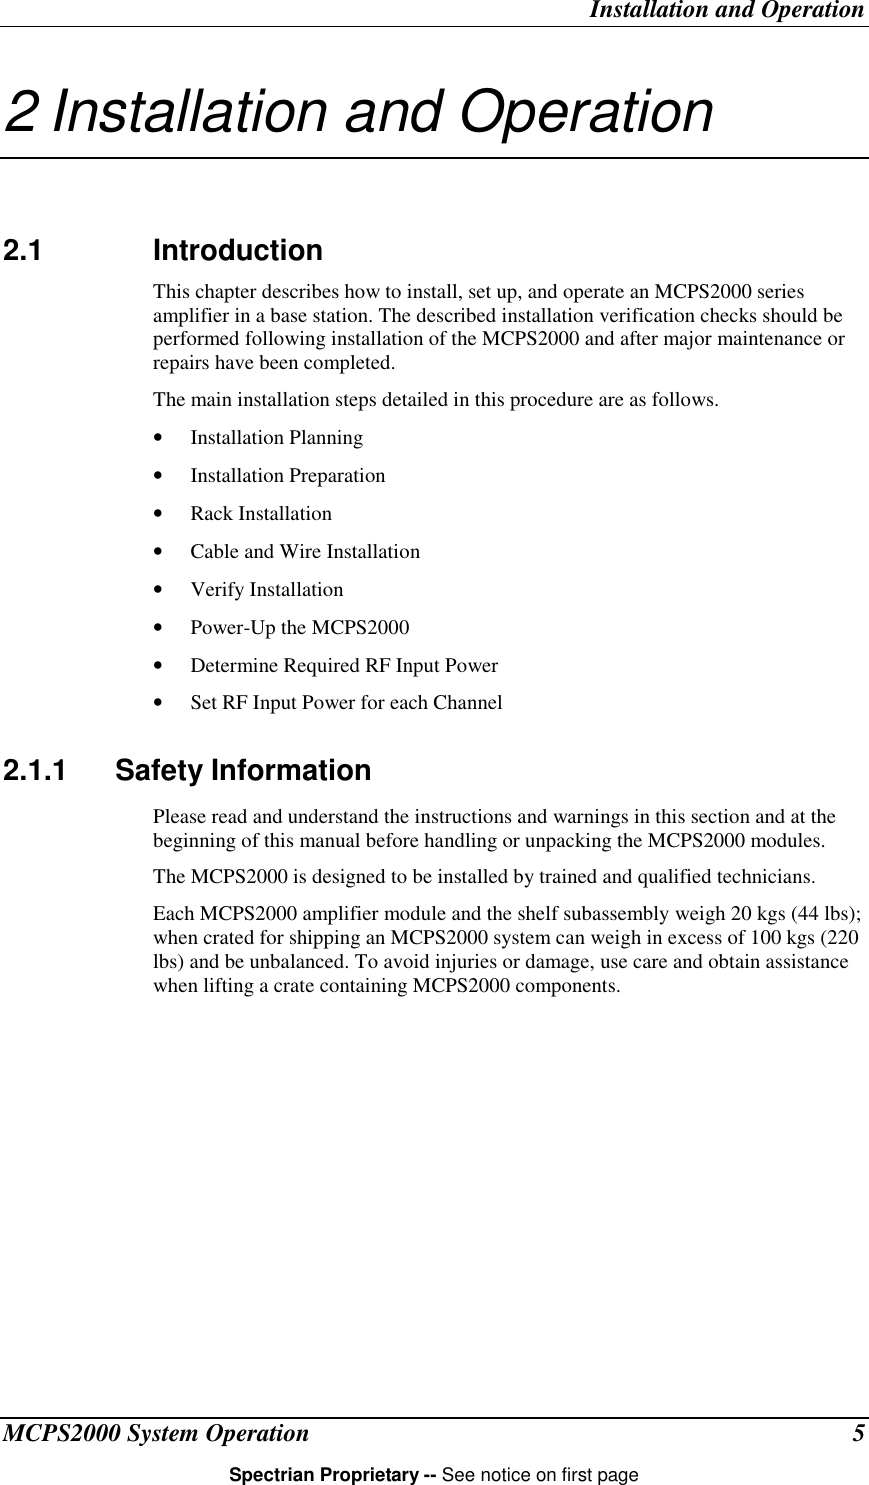 Installation and OperationMCPS2000 System Operation 5Spectrian Proprietary -- See notice on first page2 Installation and Operation2.1 IntroductionThis chapter describes how to install, set up, and operate an MCPS2000 seriesamplifier in a base station. The described installation verification checks should beperformed following installation of the MCPS2000 and after major maintenance orrepairs have been completed.The main installation steps detailed in this procedure are as follows.• Installation Planning• Installation Preparation• Rack Installation• Cable and Wire Installation• Verify Installation• Power-Up the MCPS2000• Determine Required RF Input Power• Set RF Input Power for each Channel2.1.1 Safety InformationPlease read and understand the instructions and warnings in this section and at thebeginning of this manual before handling or unpacking the MCPS2000 modules.The MCPS2000 is designed to be installed by trained and qualified technicians.Each MCPS2000 amplifier module and the shelf subassembly weigh 20 kgs (44 lbs);when crated for shipping an MCPS2000 system can weigh in excess of 100 kgs (220lbs) and be unbalanced. To avoid injuries or damage, use care and obtain assistancewhen lifting a crate containing MCPS2000 components.